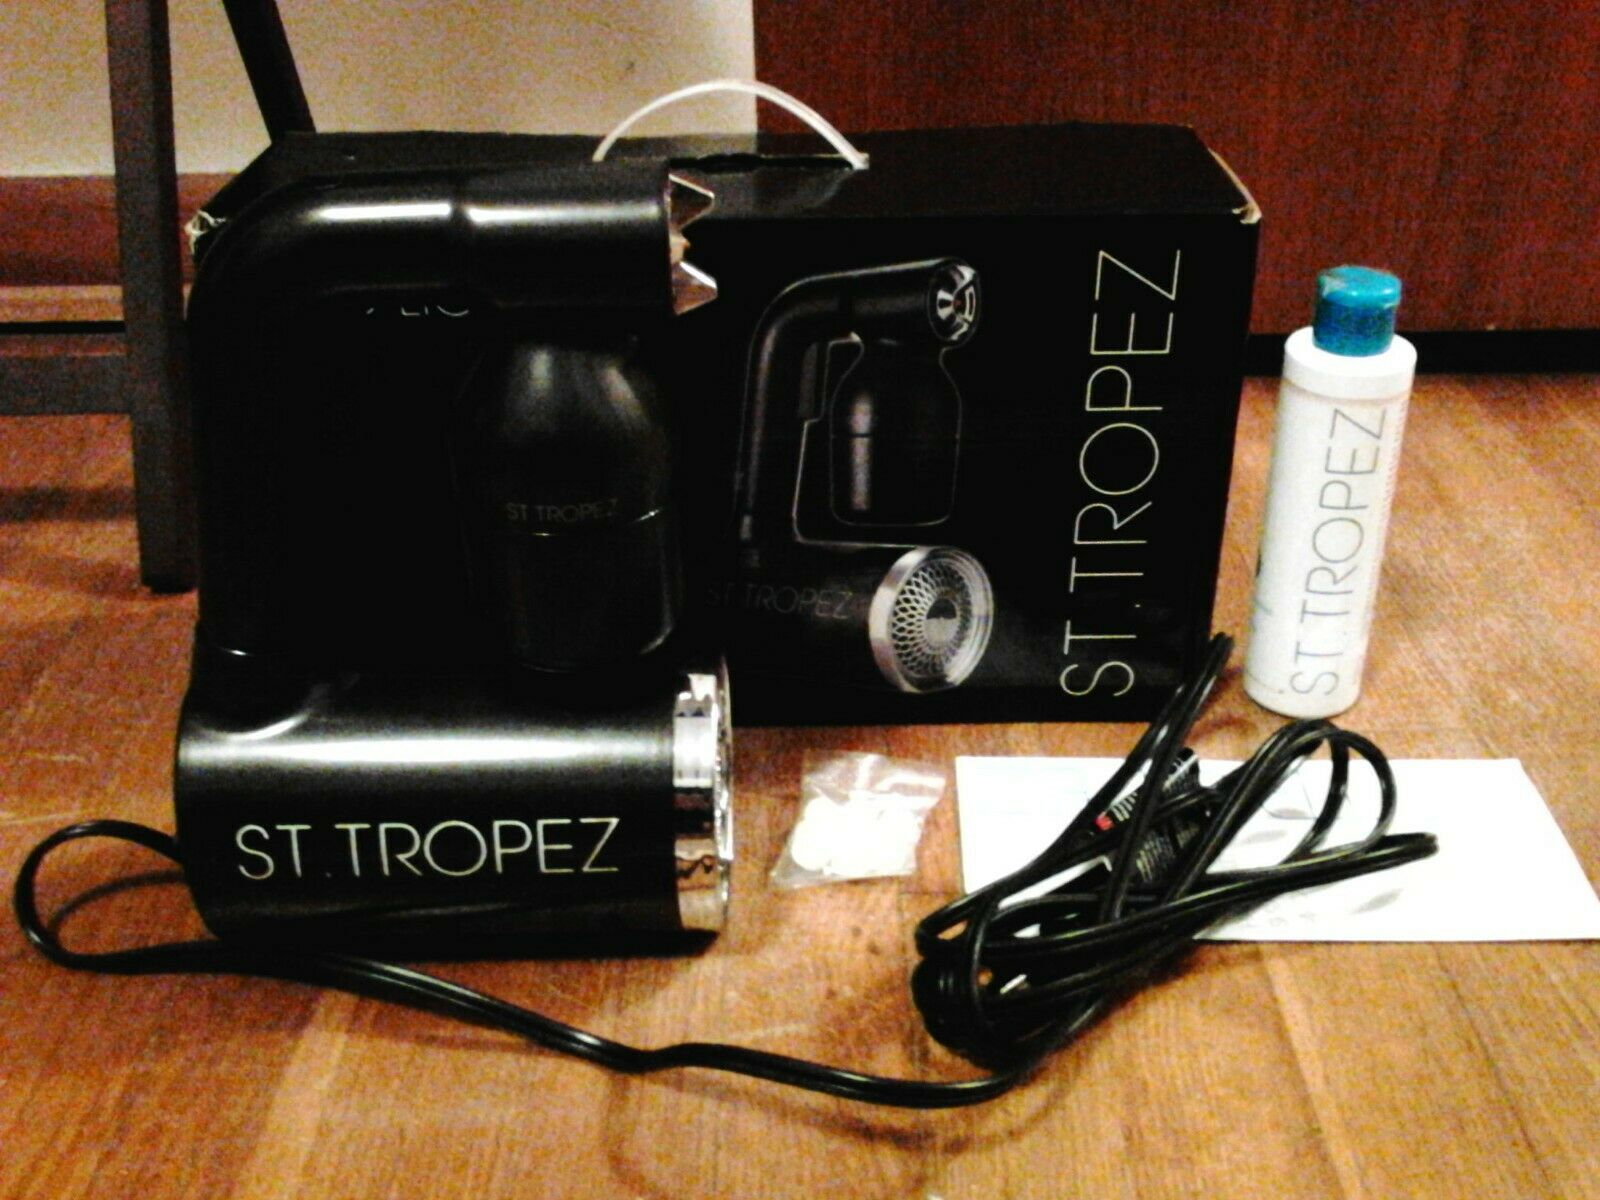 St. Tropez Pro Light All-in-one Professional Hand Held Spray Tan Machine, Used